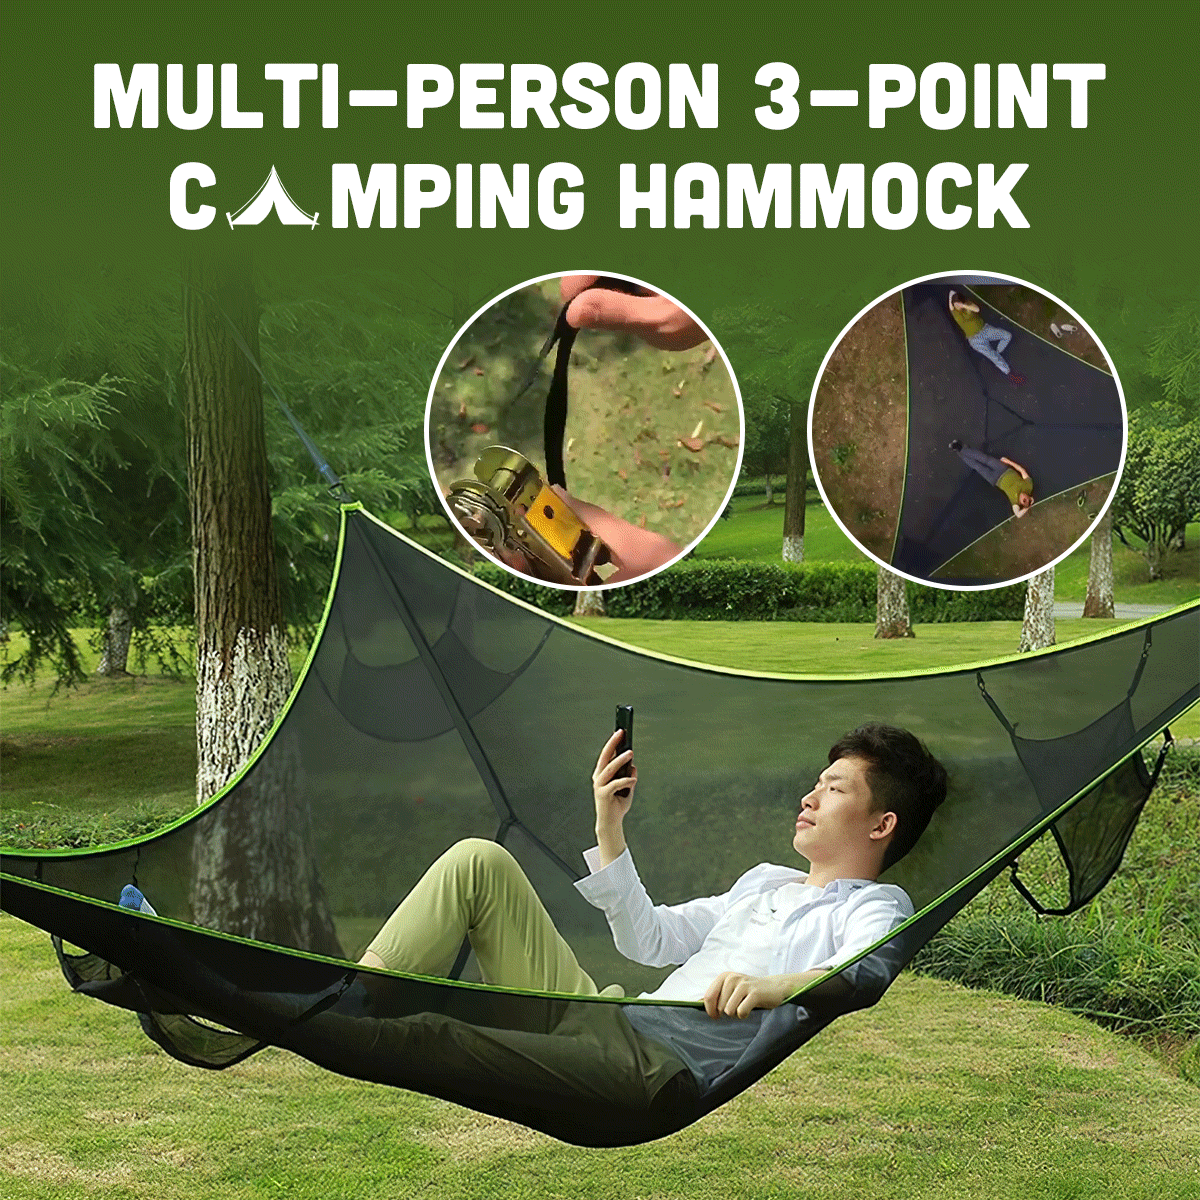 Trending Multi-person 3-Point Camping Hammock